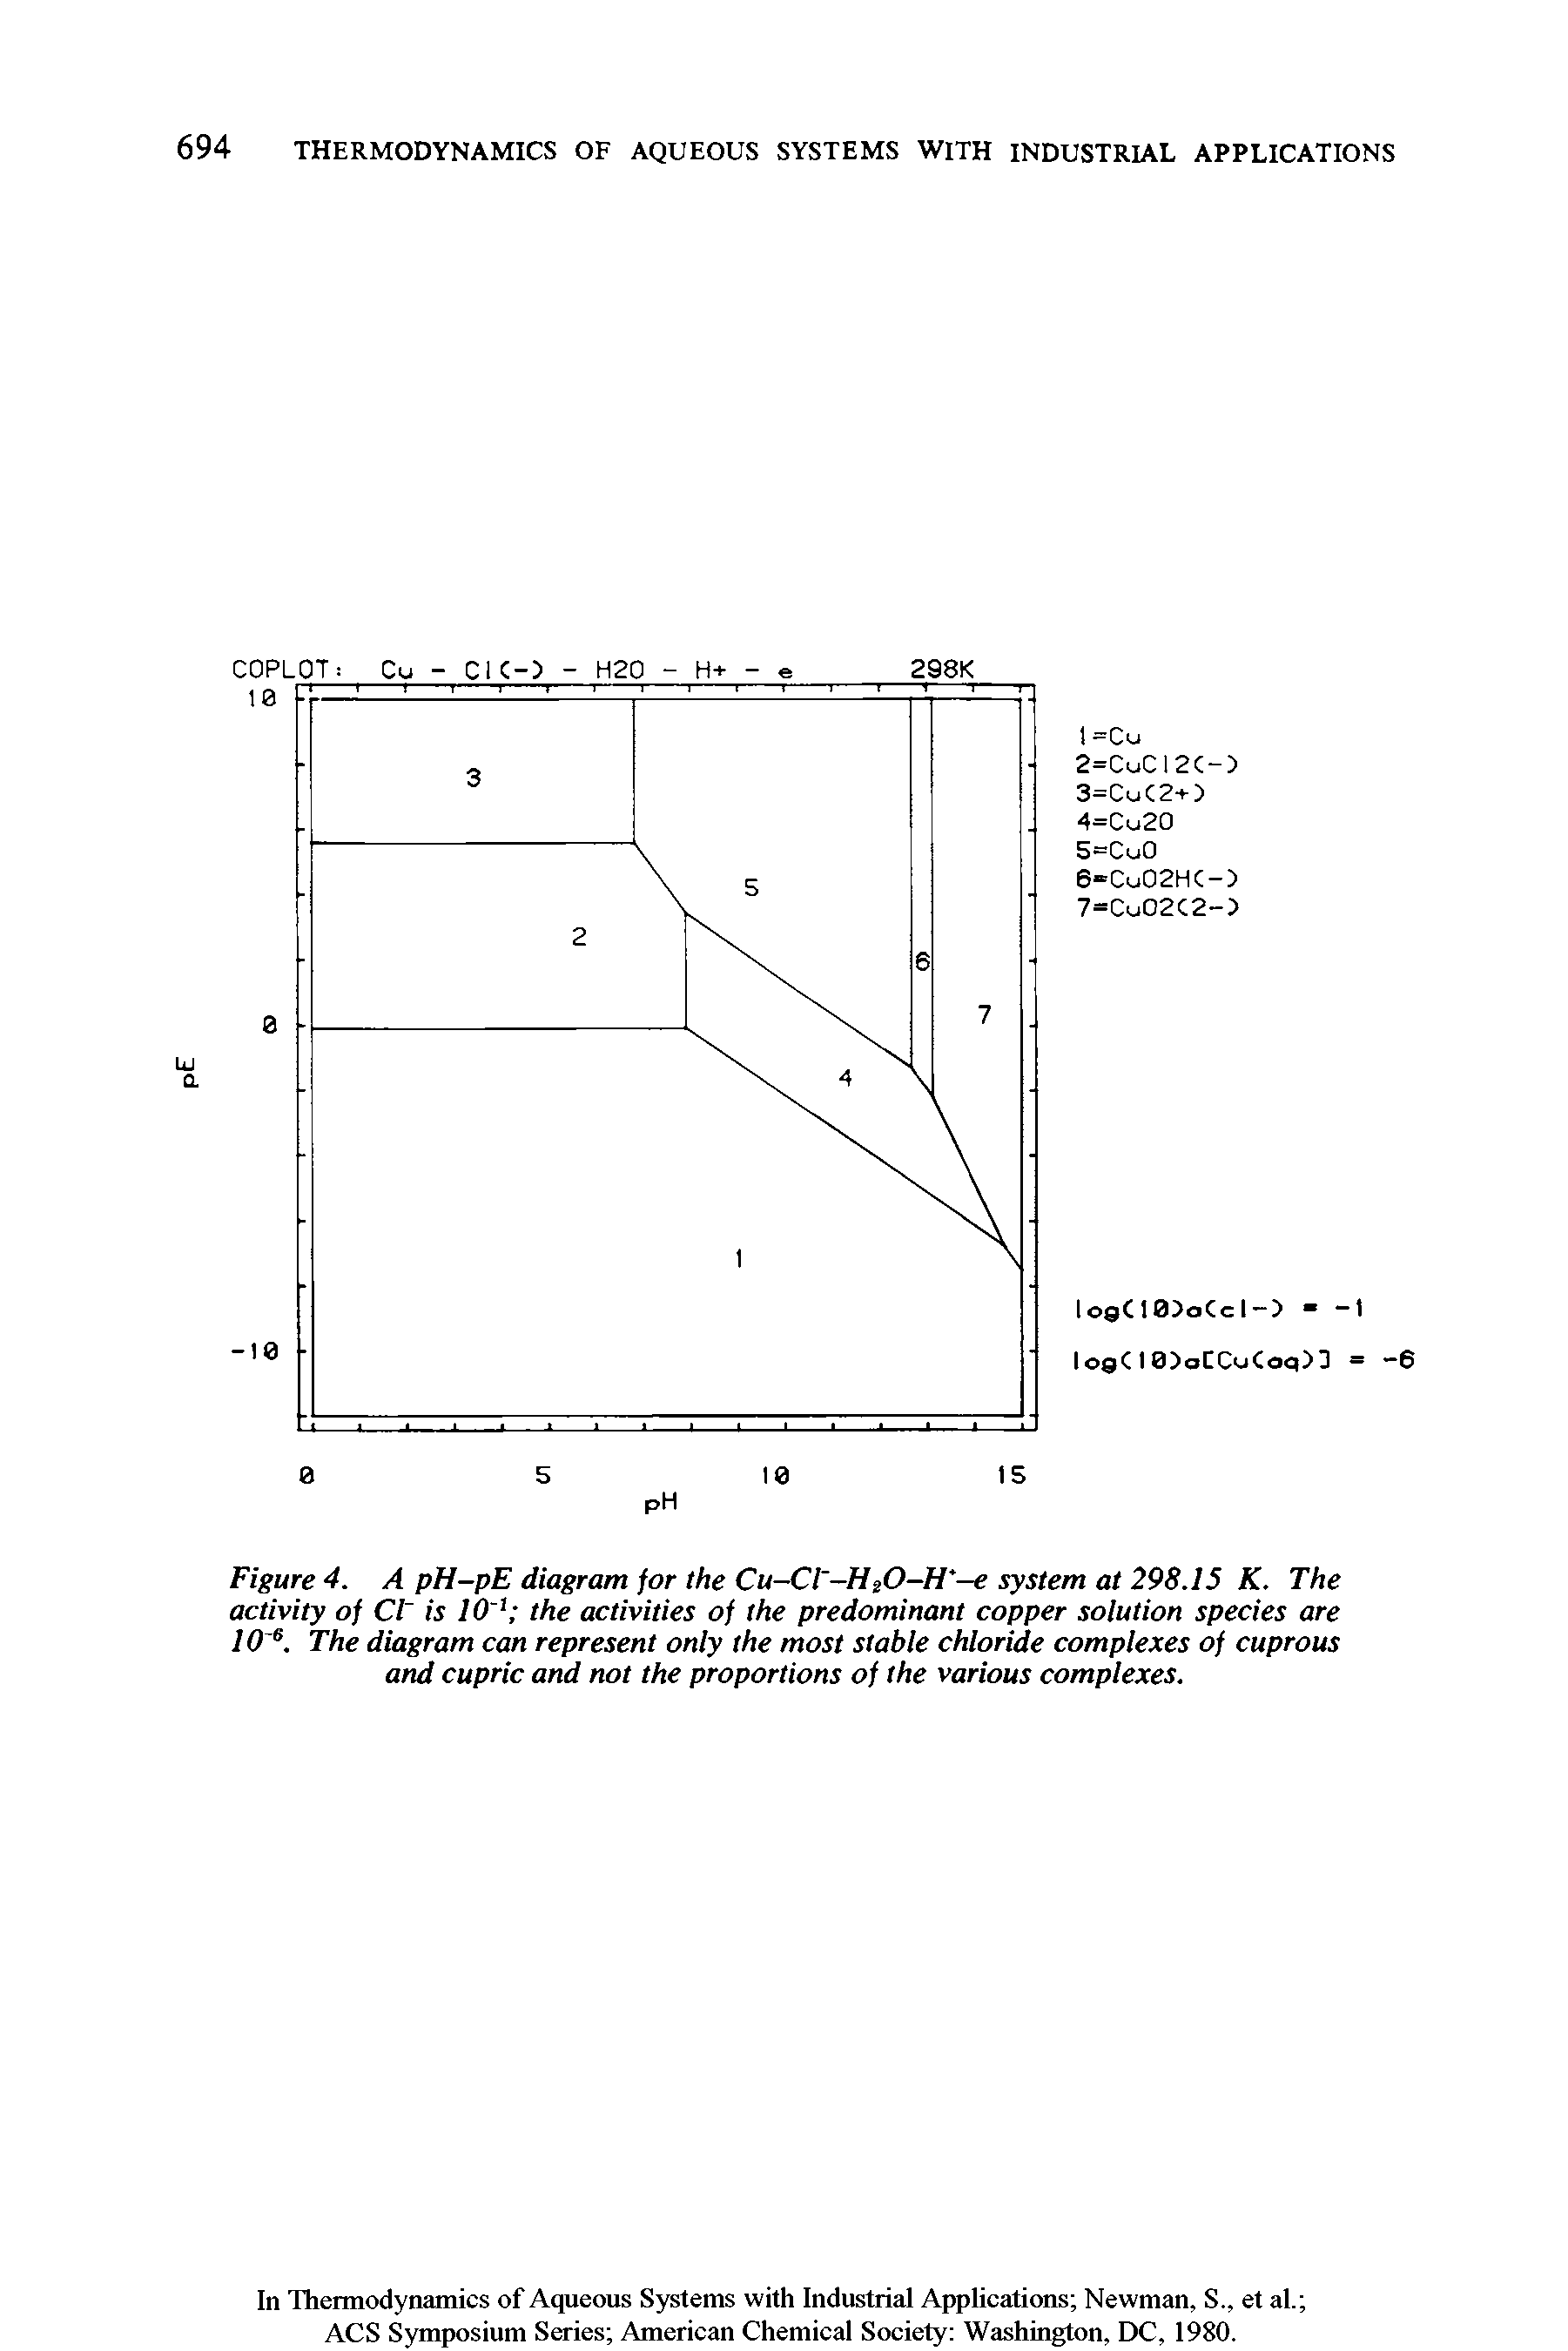 Figure 4. A pH-pE diagram for the Cu-Cl -H O-H -e system at 298.15 K. The activity of Cl is 101 the activities of the predominant copper solution species are 10 6. The diagram can represent only the most stable chloride complexes of cuprous and cupric and not the proportions of the various complexes.